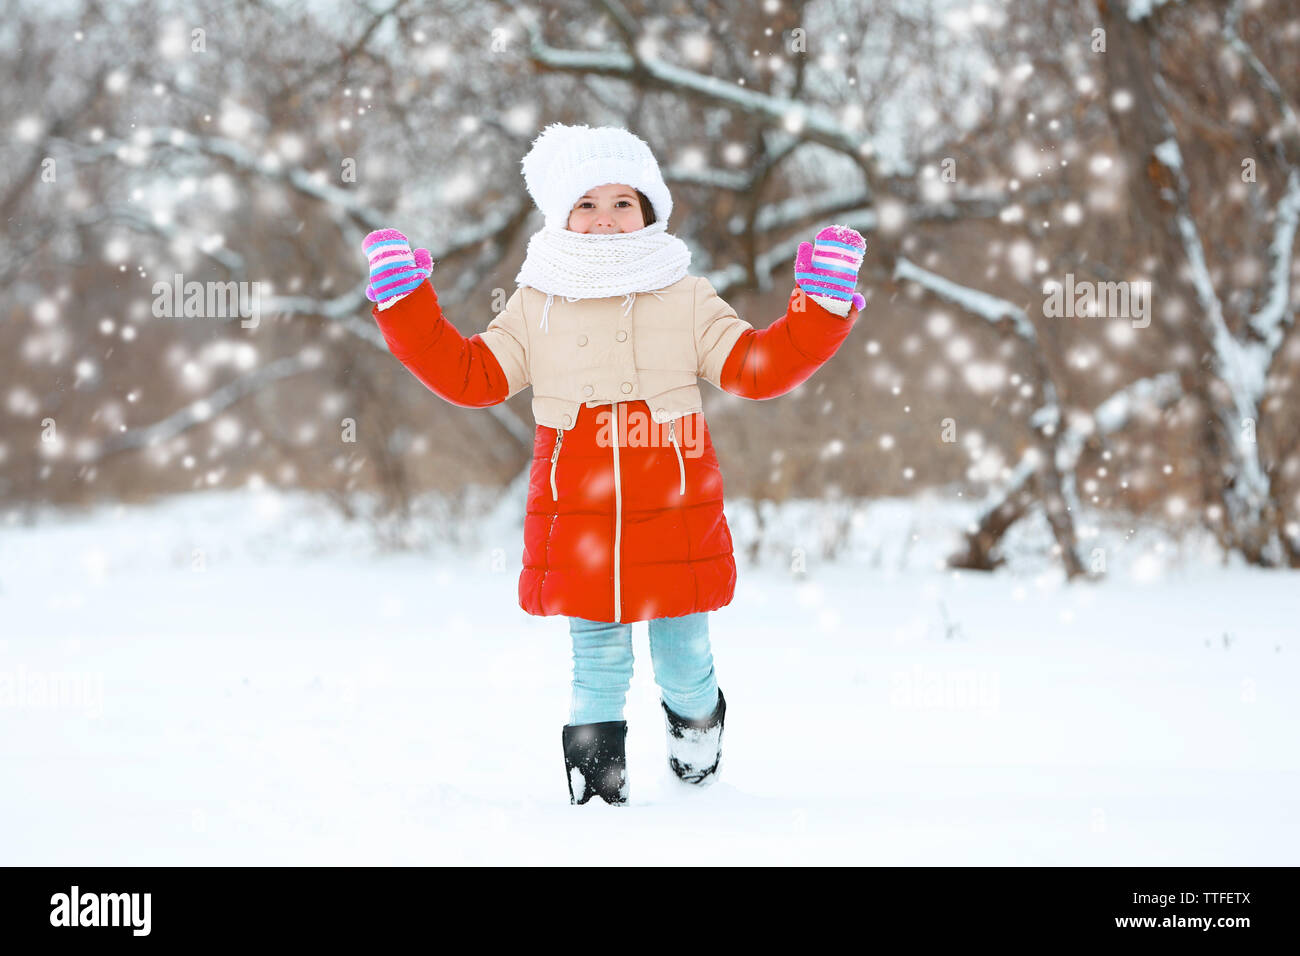 Little girl with winter clothes going through deep snow in park